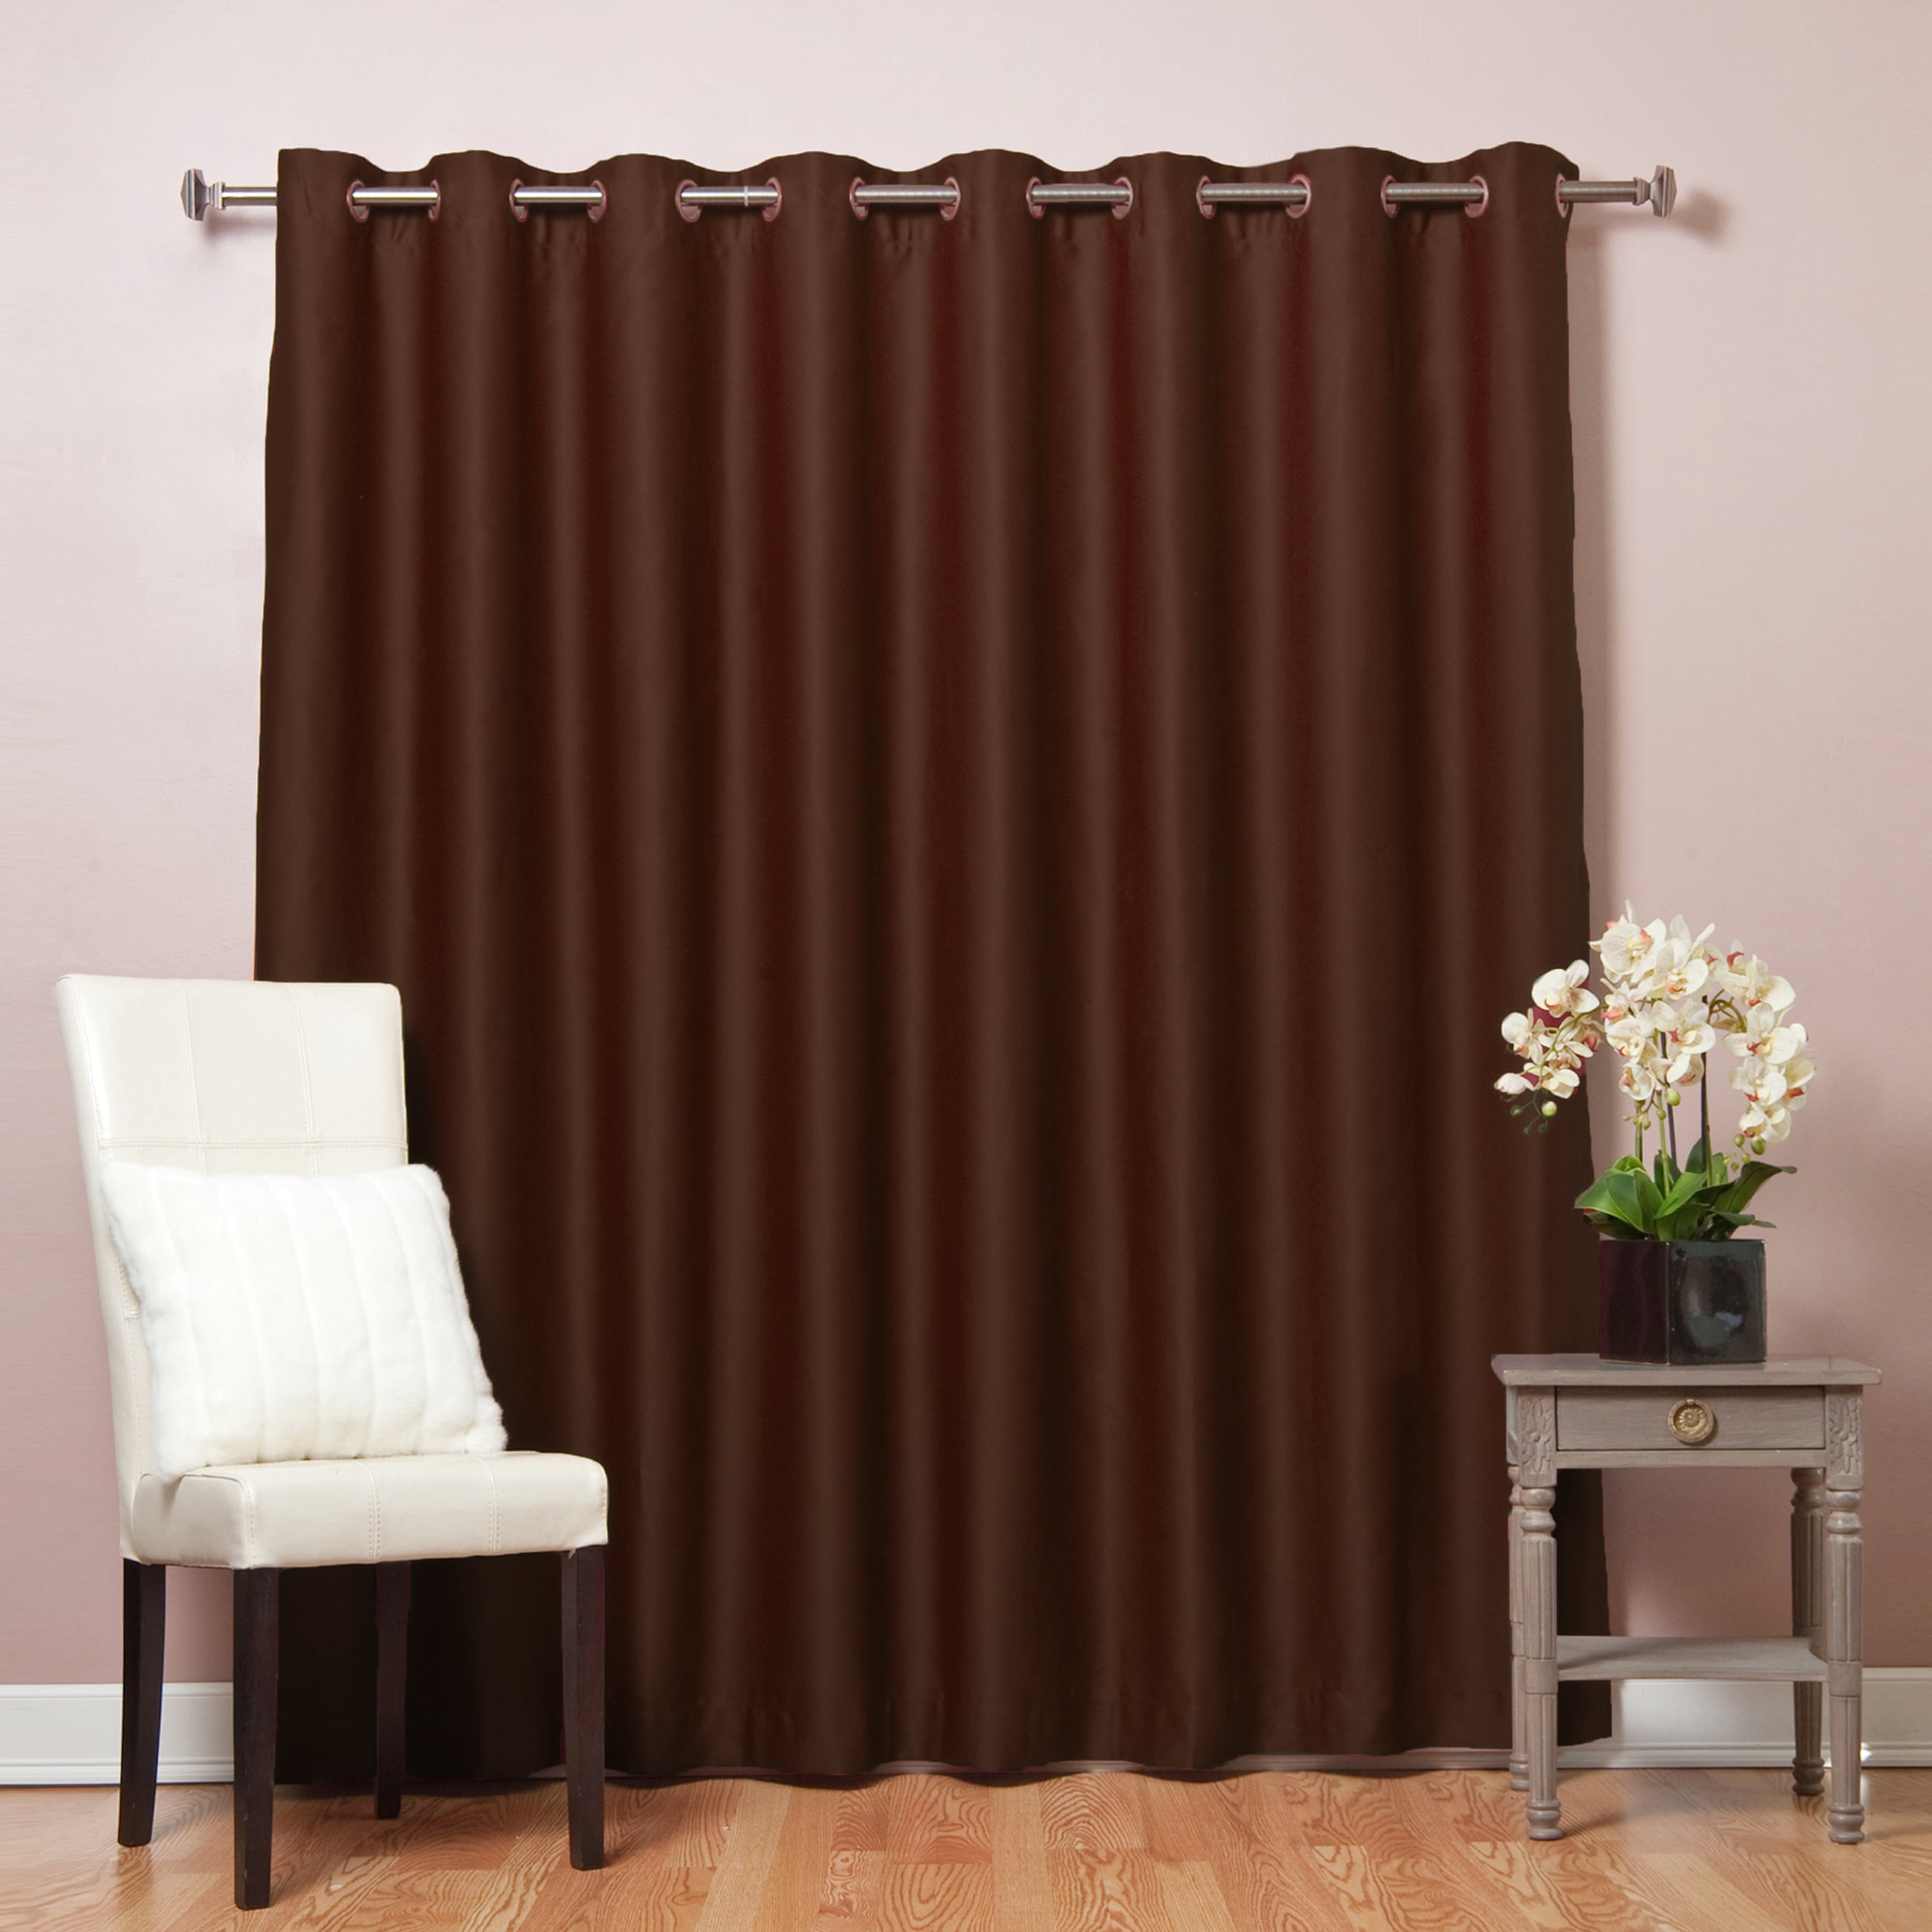 1 SET 100% THERMAL BLACK OUT WINDOW LINED CURTAIN PANEL DRAPE BRONZE GROMMET AAA 